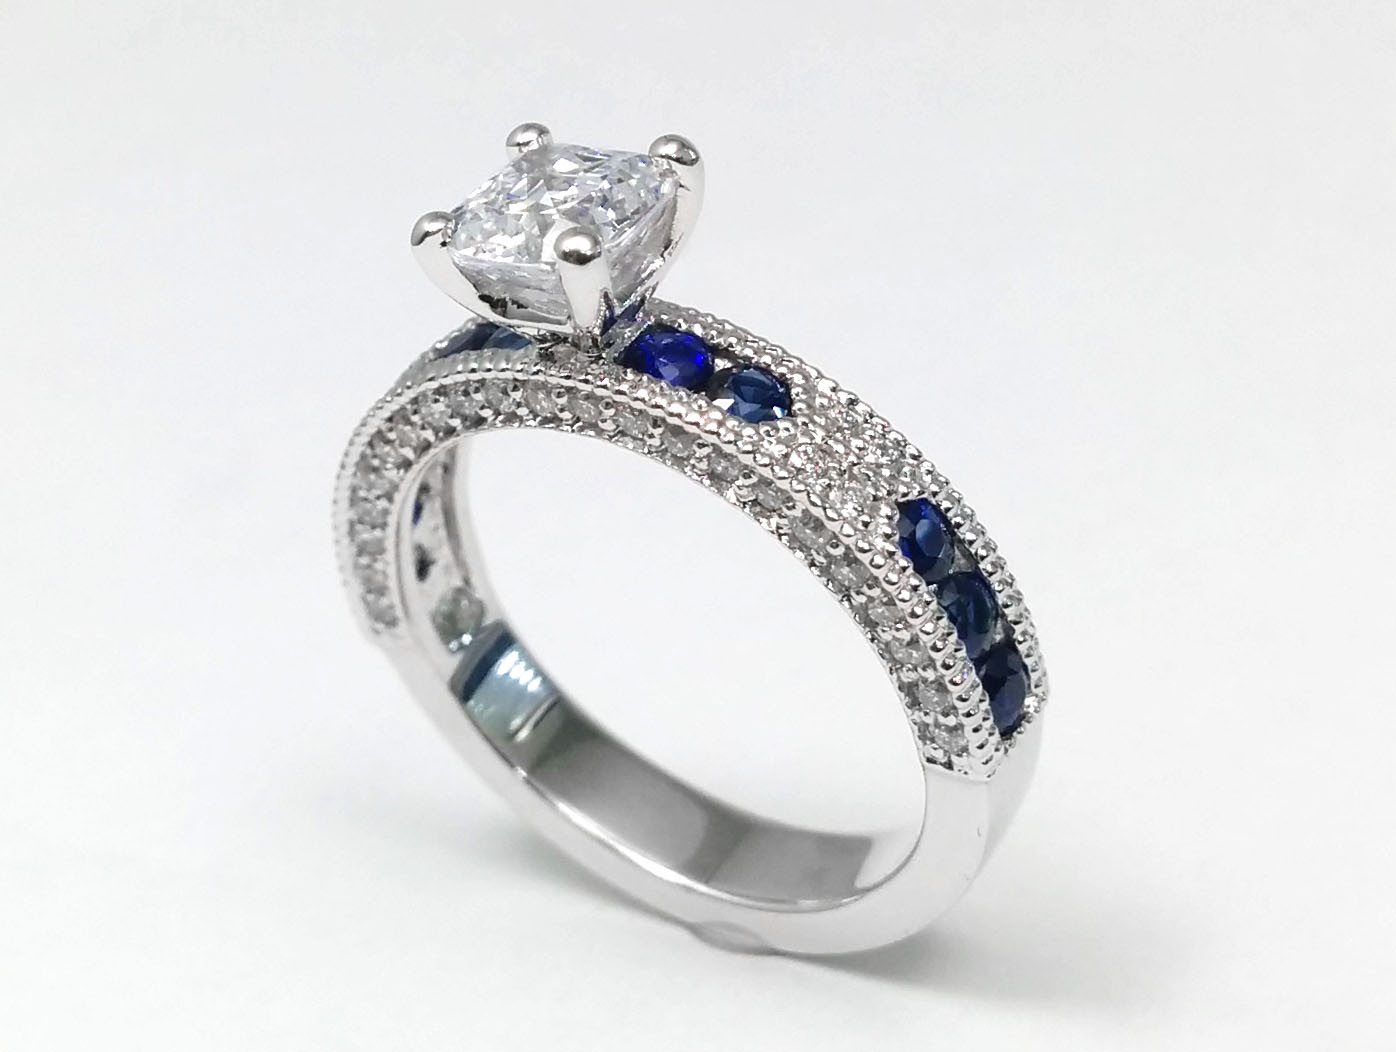 Diamond Engagement Rings With Sapphire Accents
 Blue Sapphire Engagement Rings from MDC Diamonds NYC